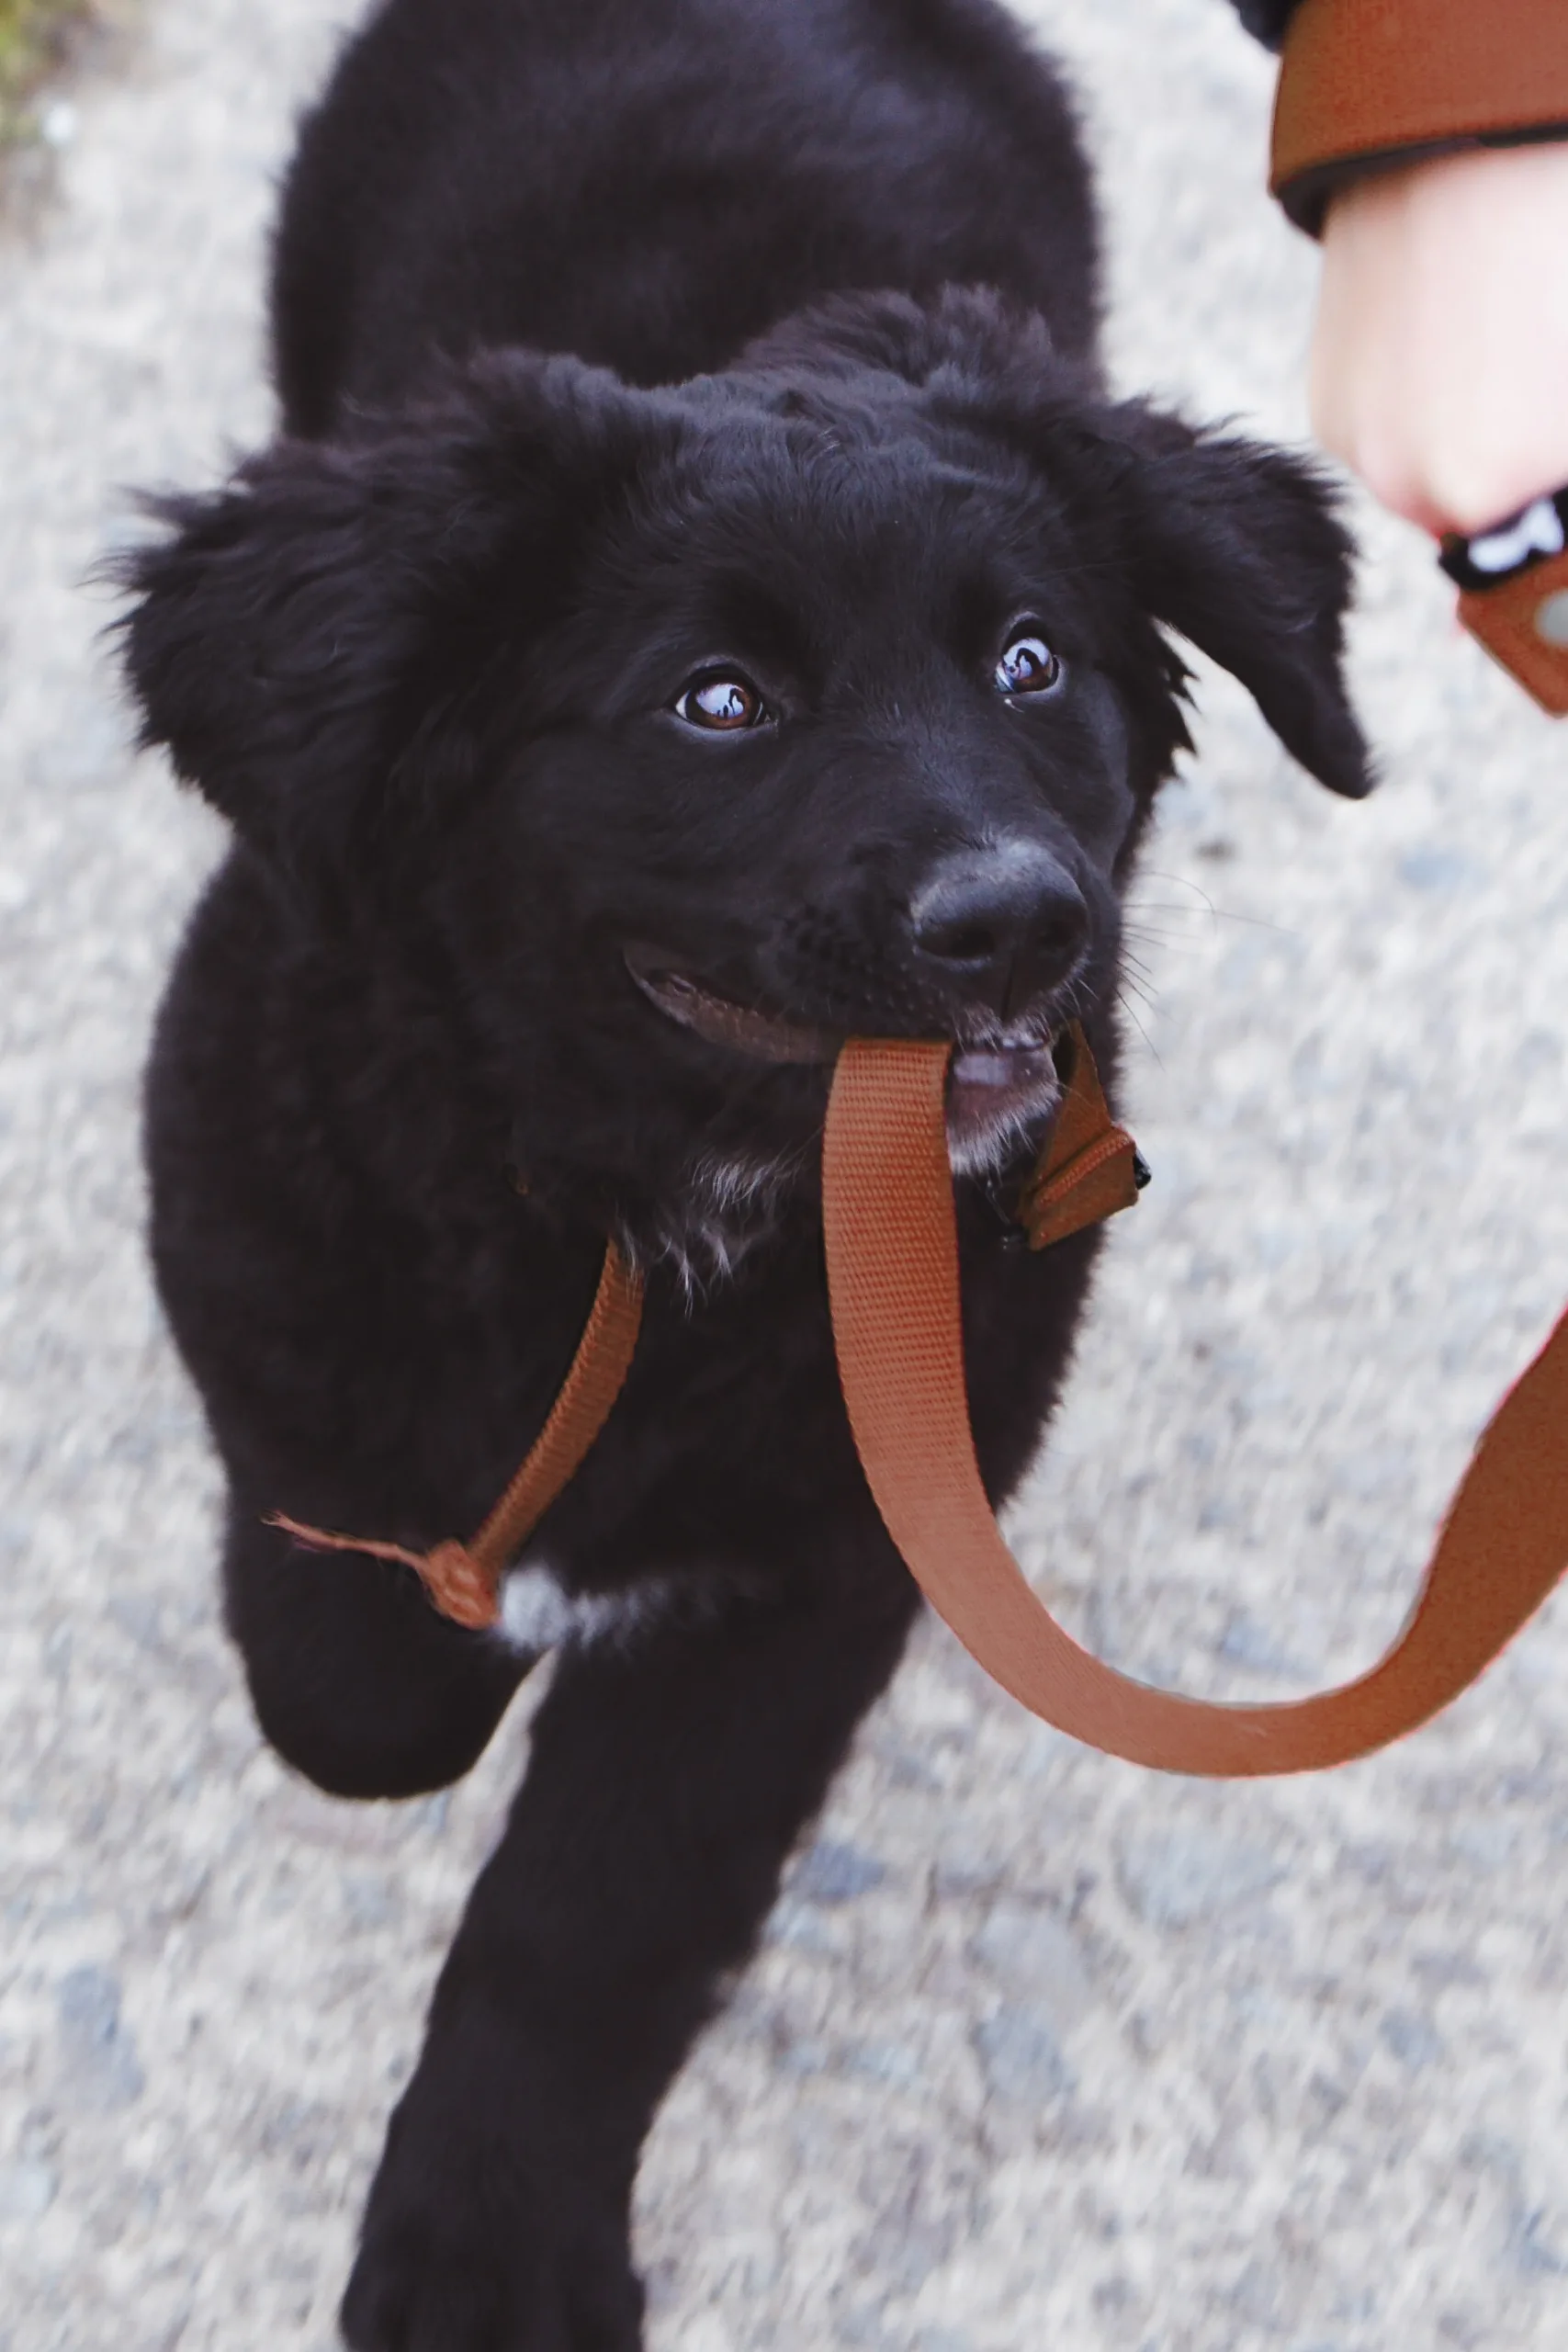 Puppy walking and puppy sitting services help train puppy on leash manners